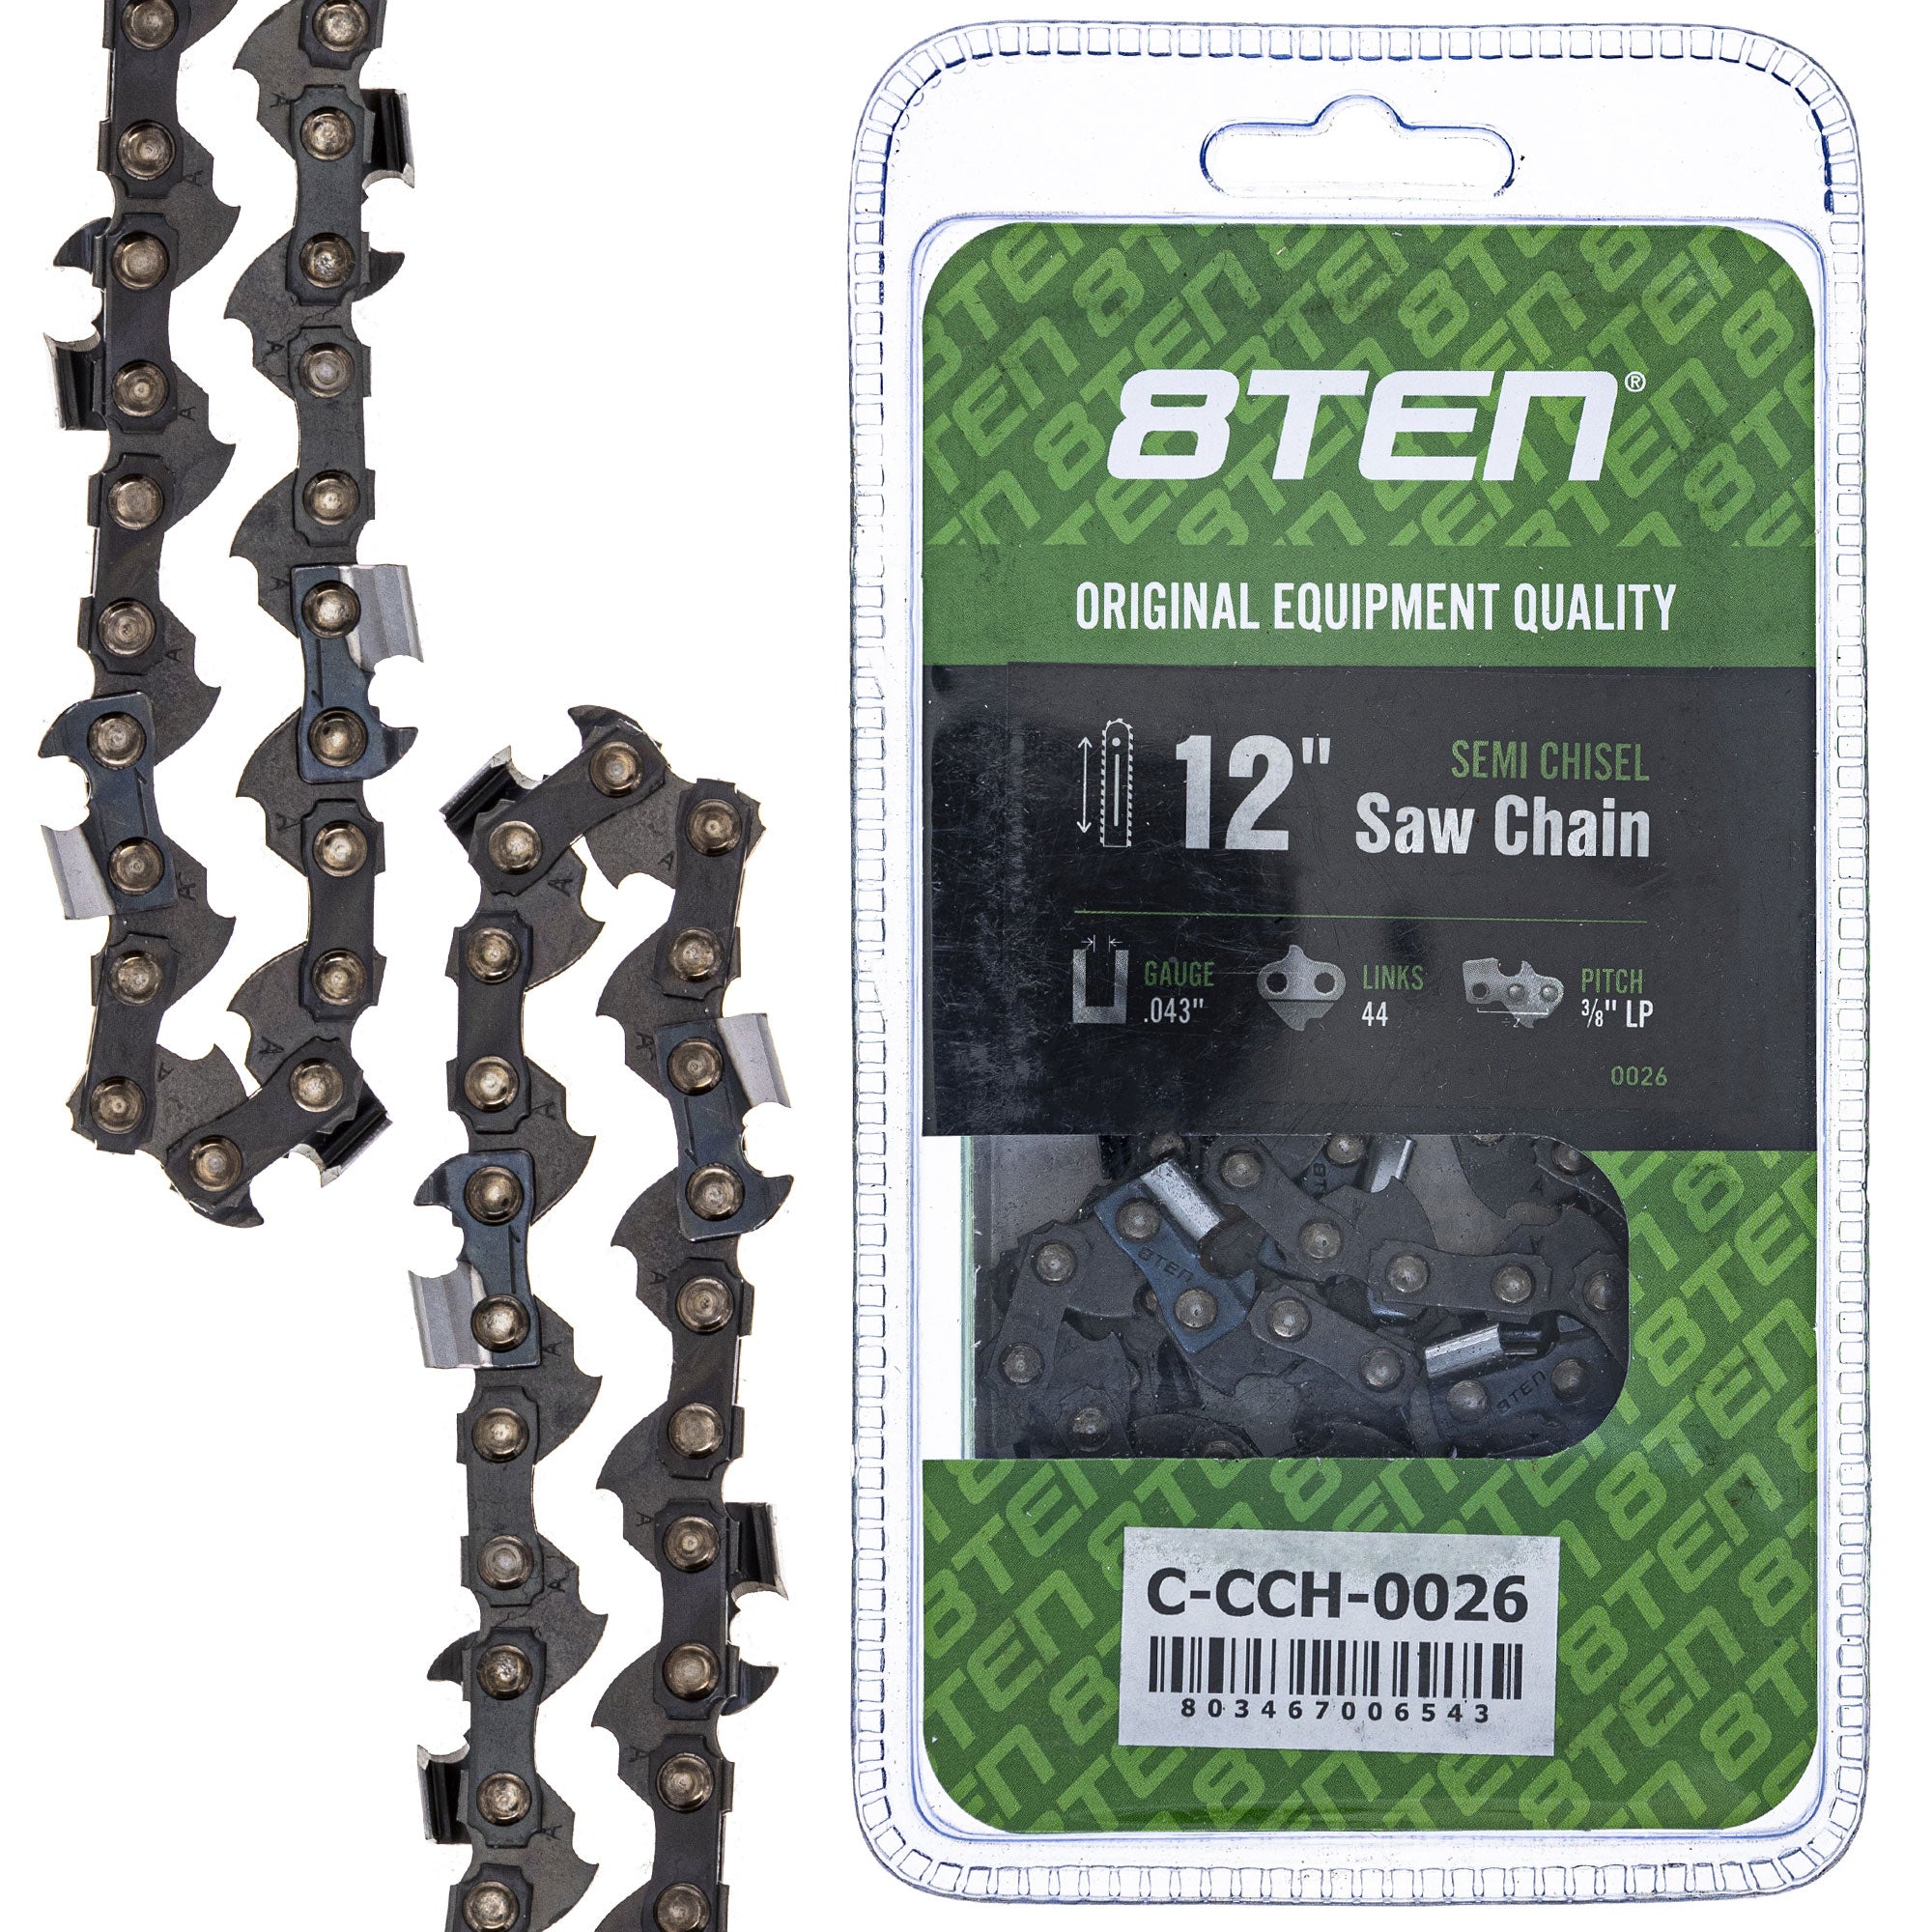 8TEN MK1010240 Guide Bar & Chain for PPT-266H PPT-266 MSE MSA